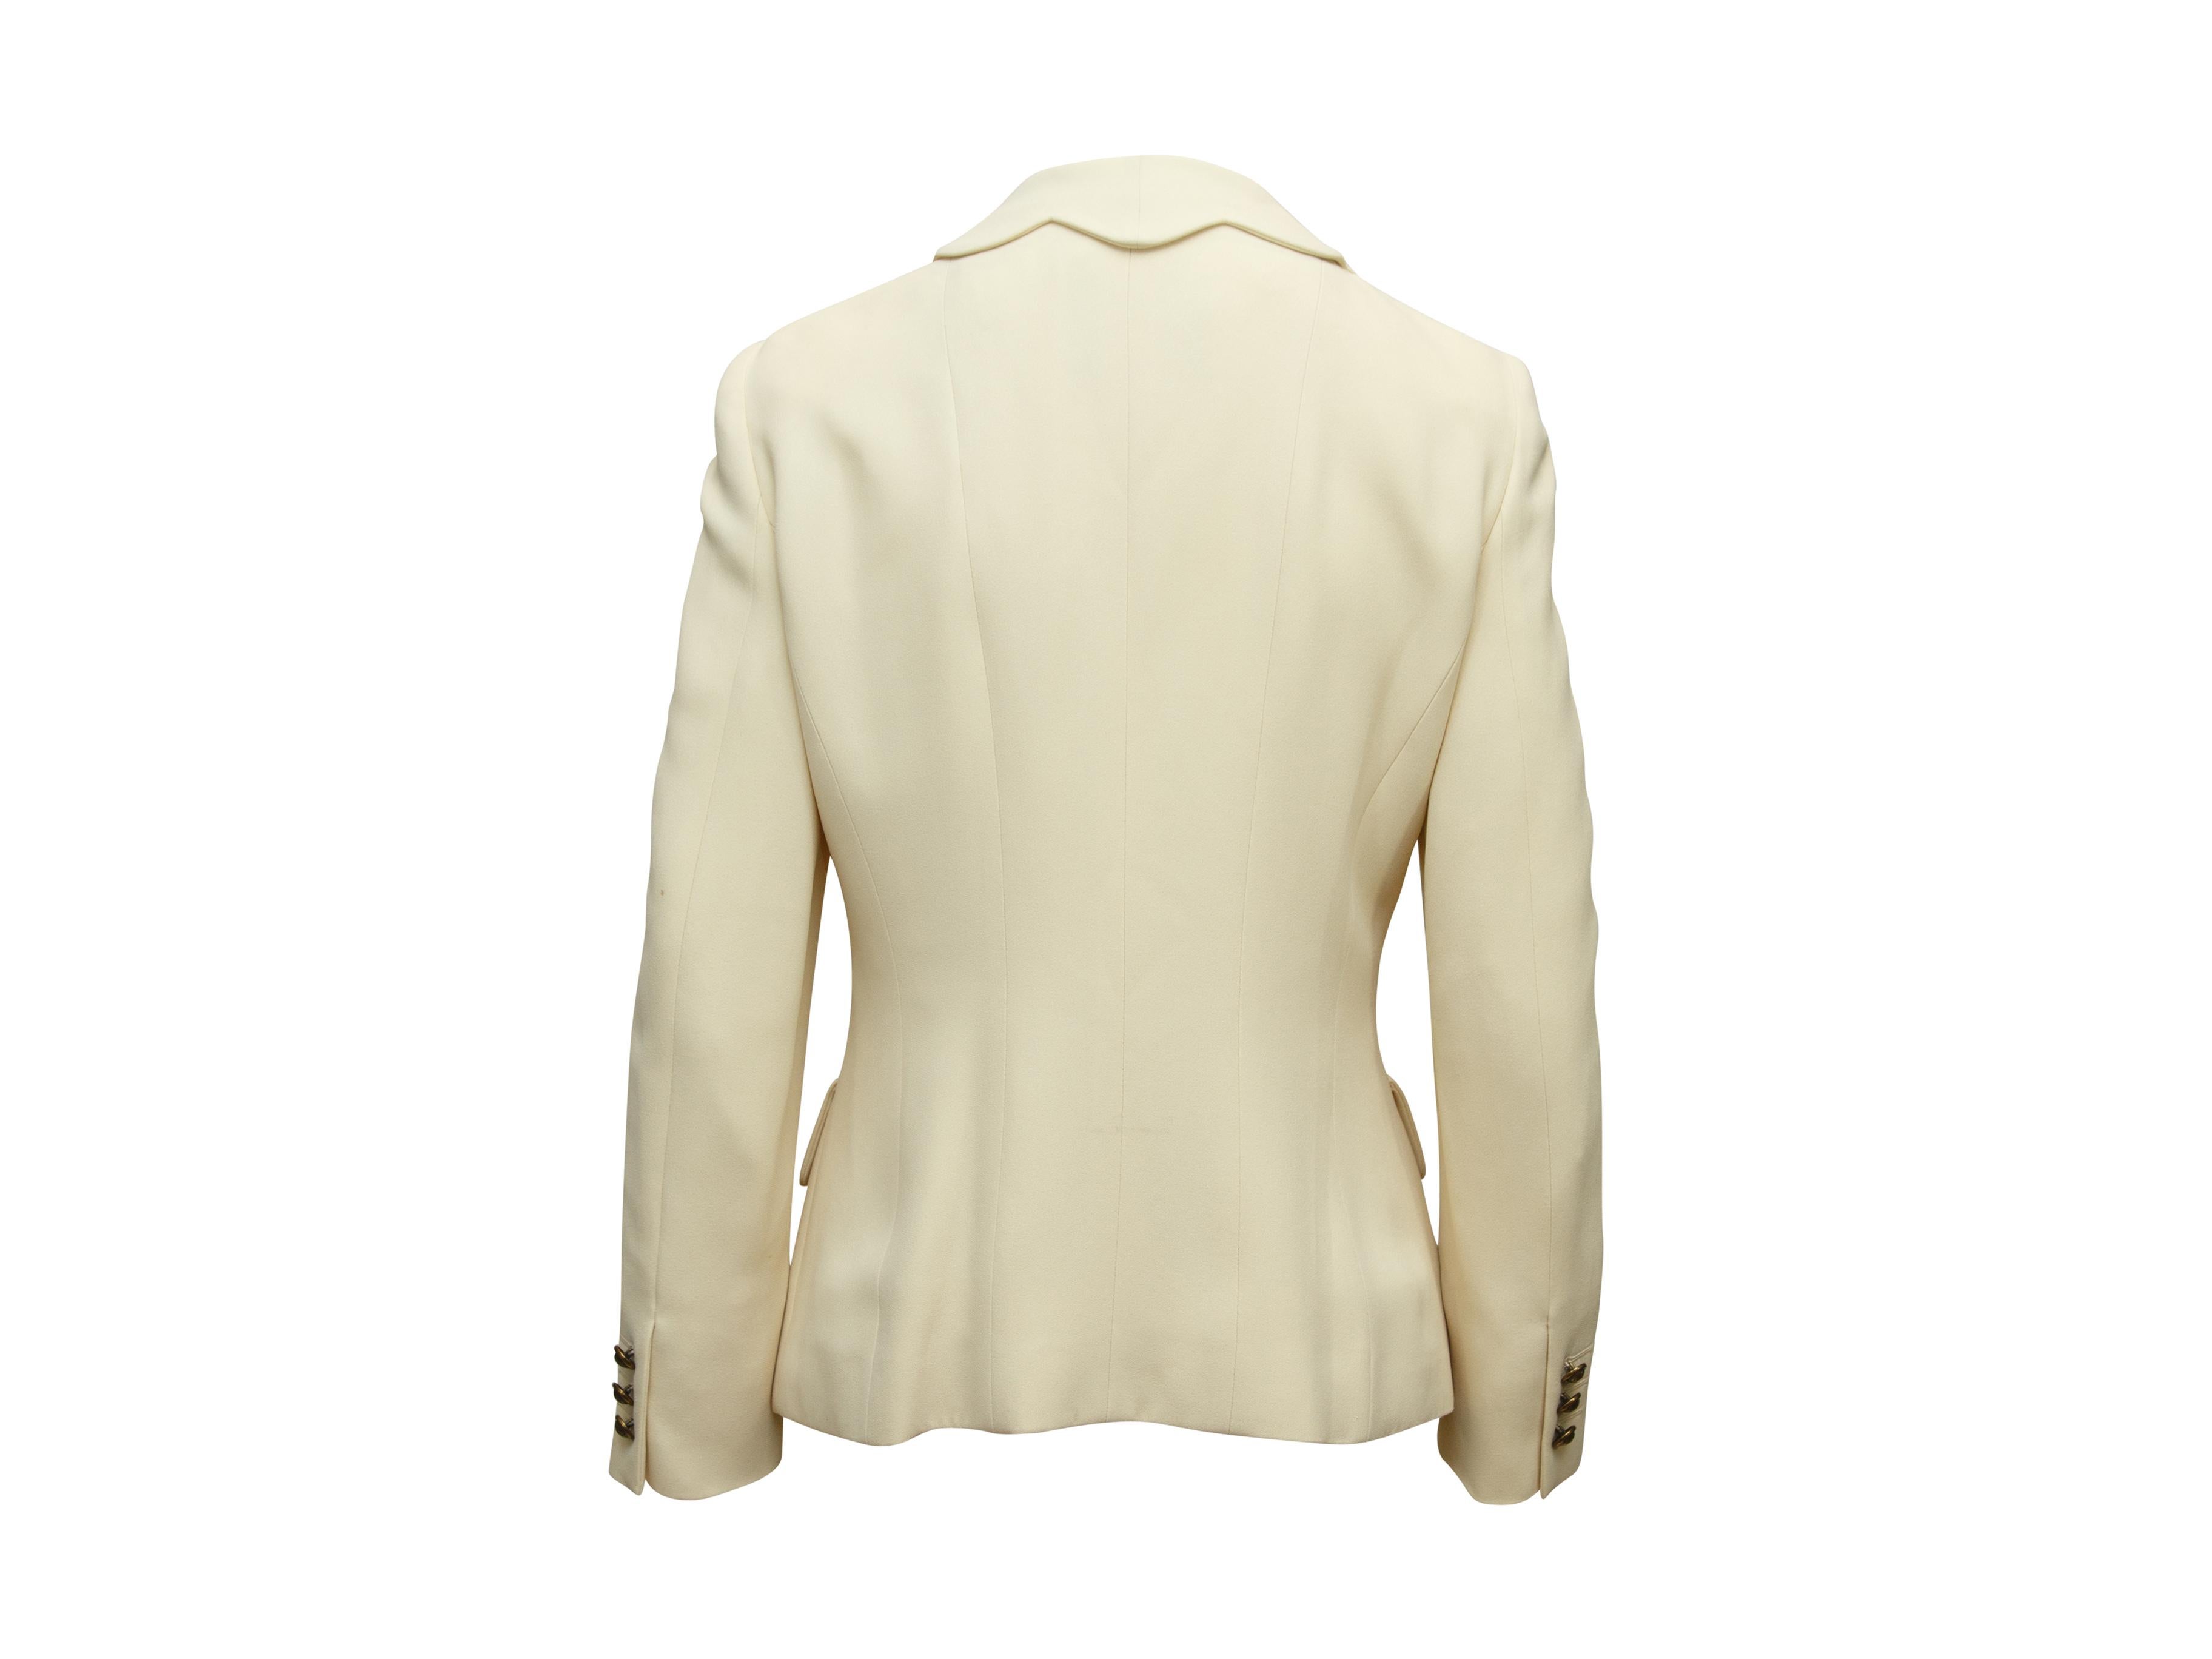 Beige Cheap and Chic By Moschino Cream Scalloped Jacket